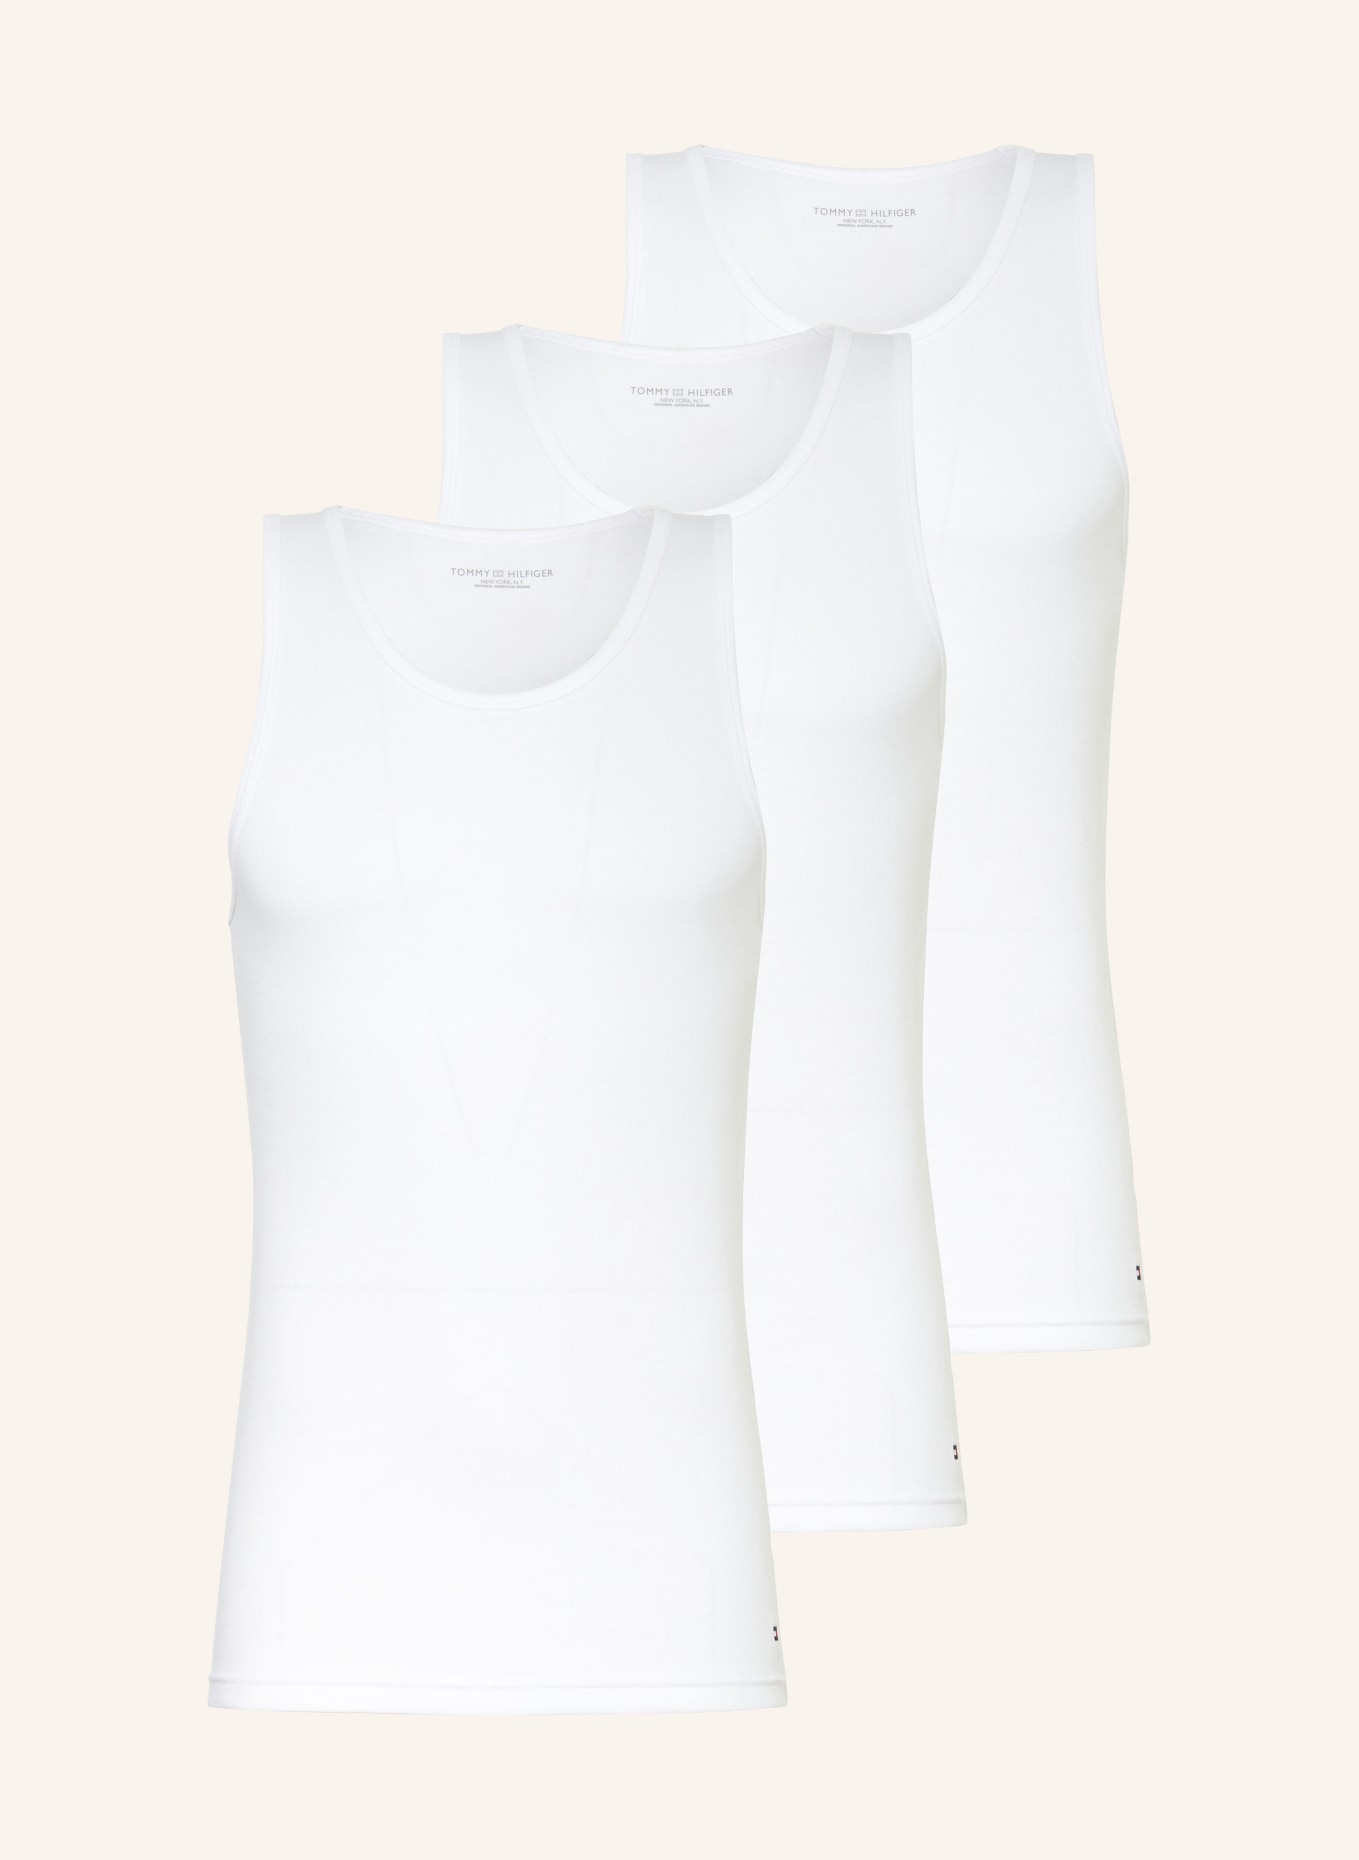 TOMMY HILFIGER 3-pack undershirts, Color: WHITE (Image 1)